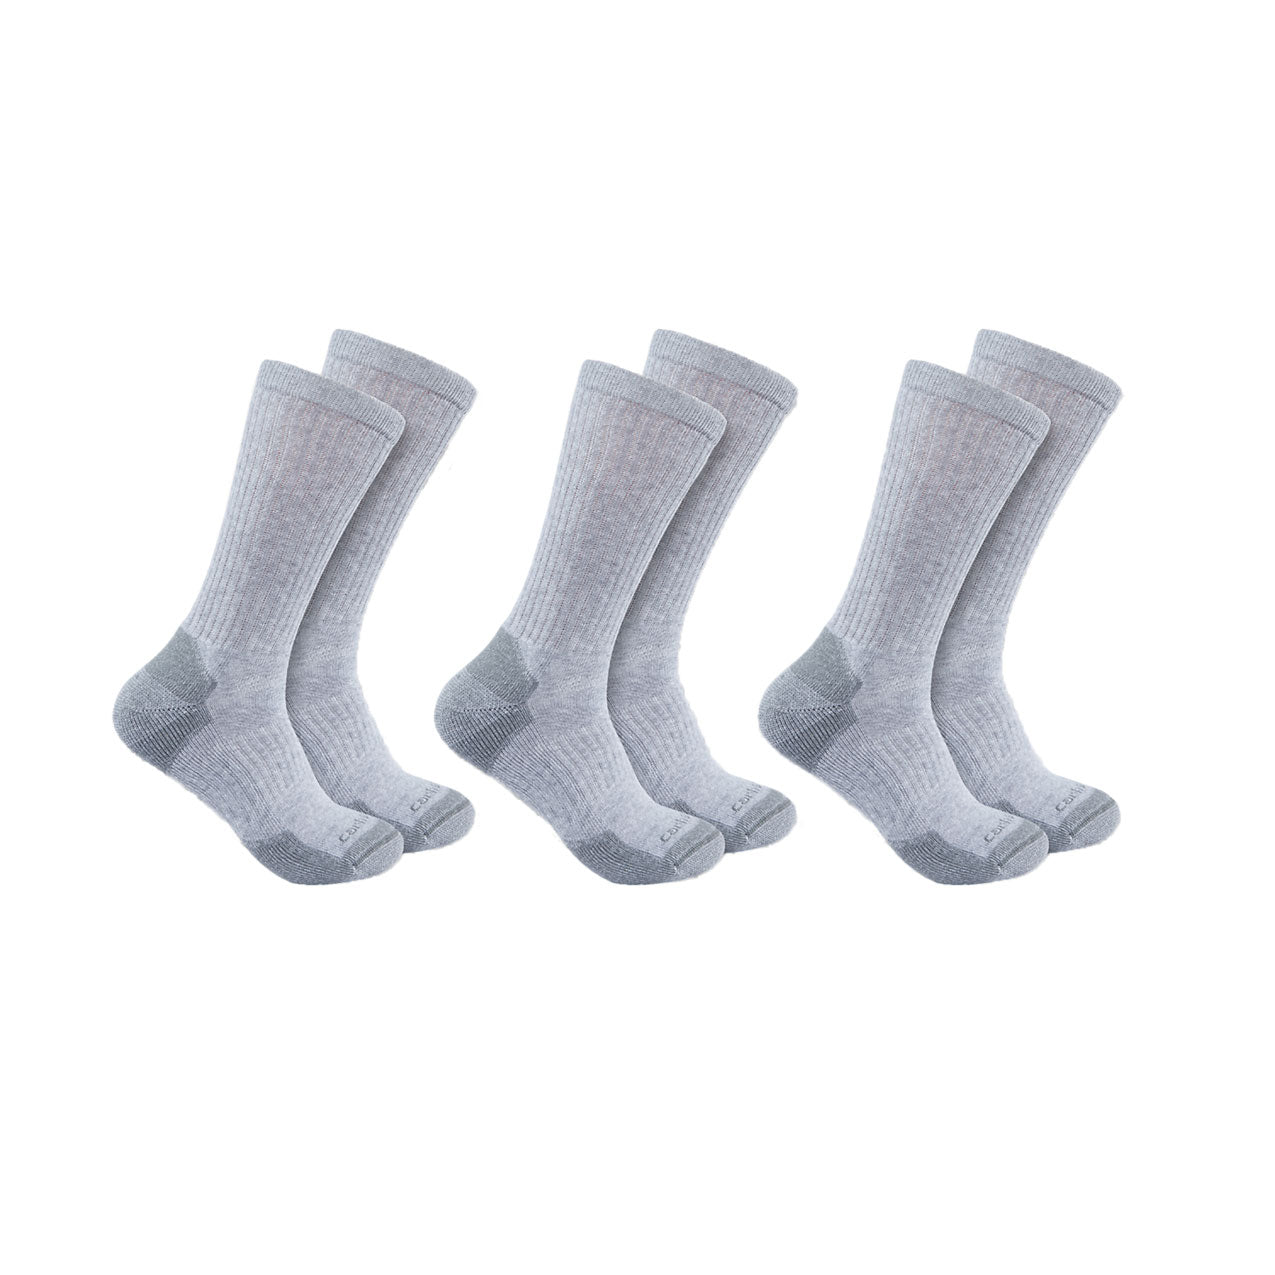 MIDWEIGHT COTTON BLEND CREW SOCK 3 Pack Heather Grey